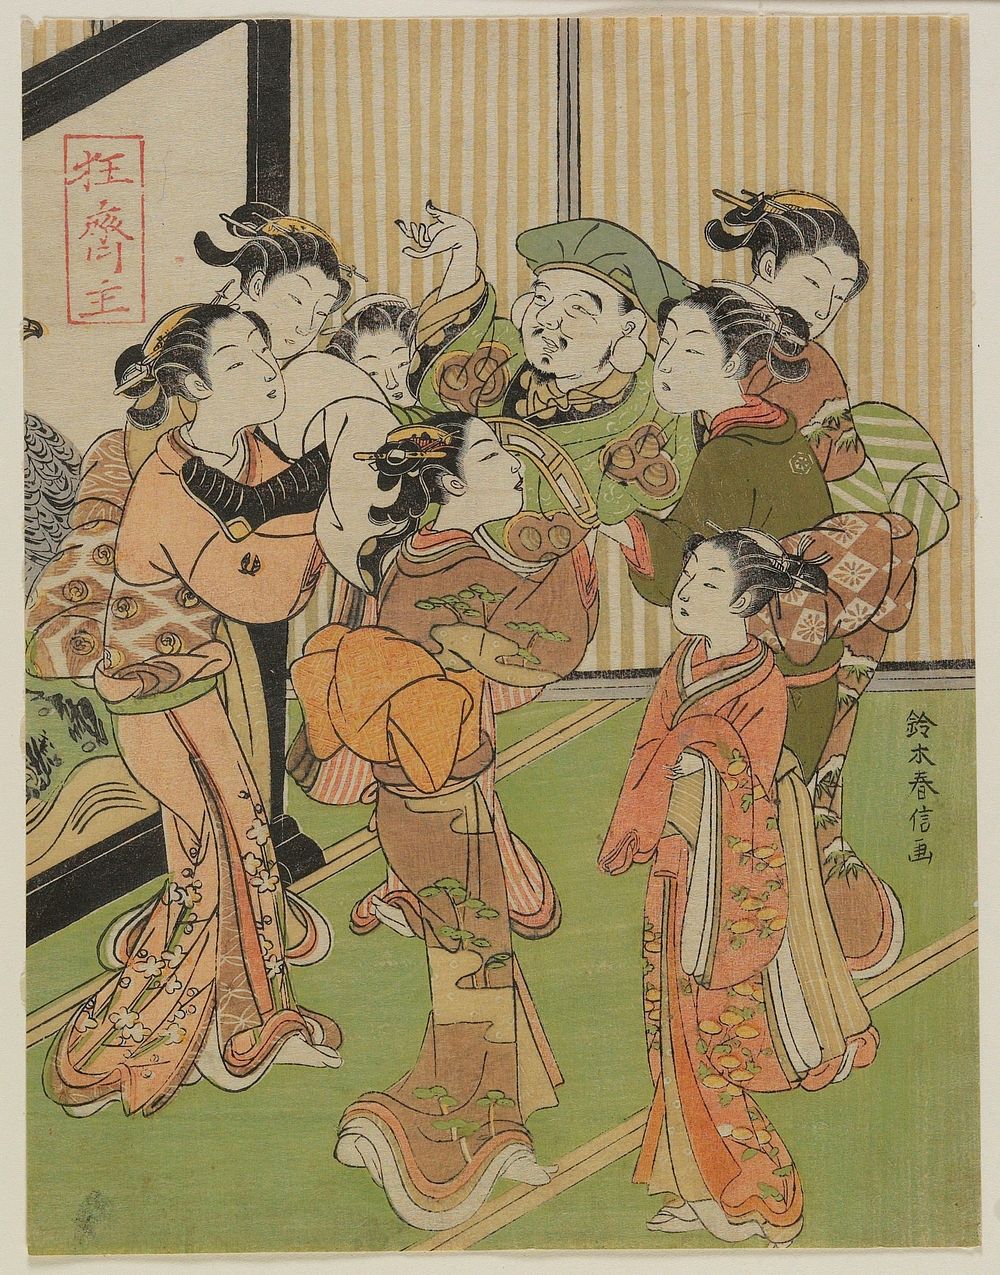 Seven Women Tossing Daikoku in the Air at New Year. Original from the Minneapolis Institute of Art.